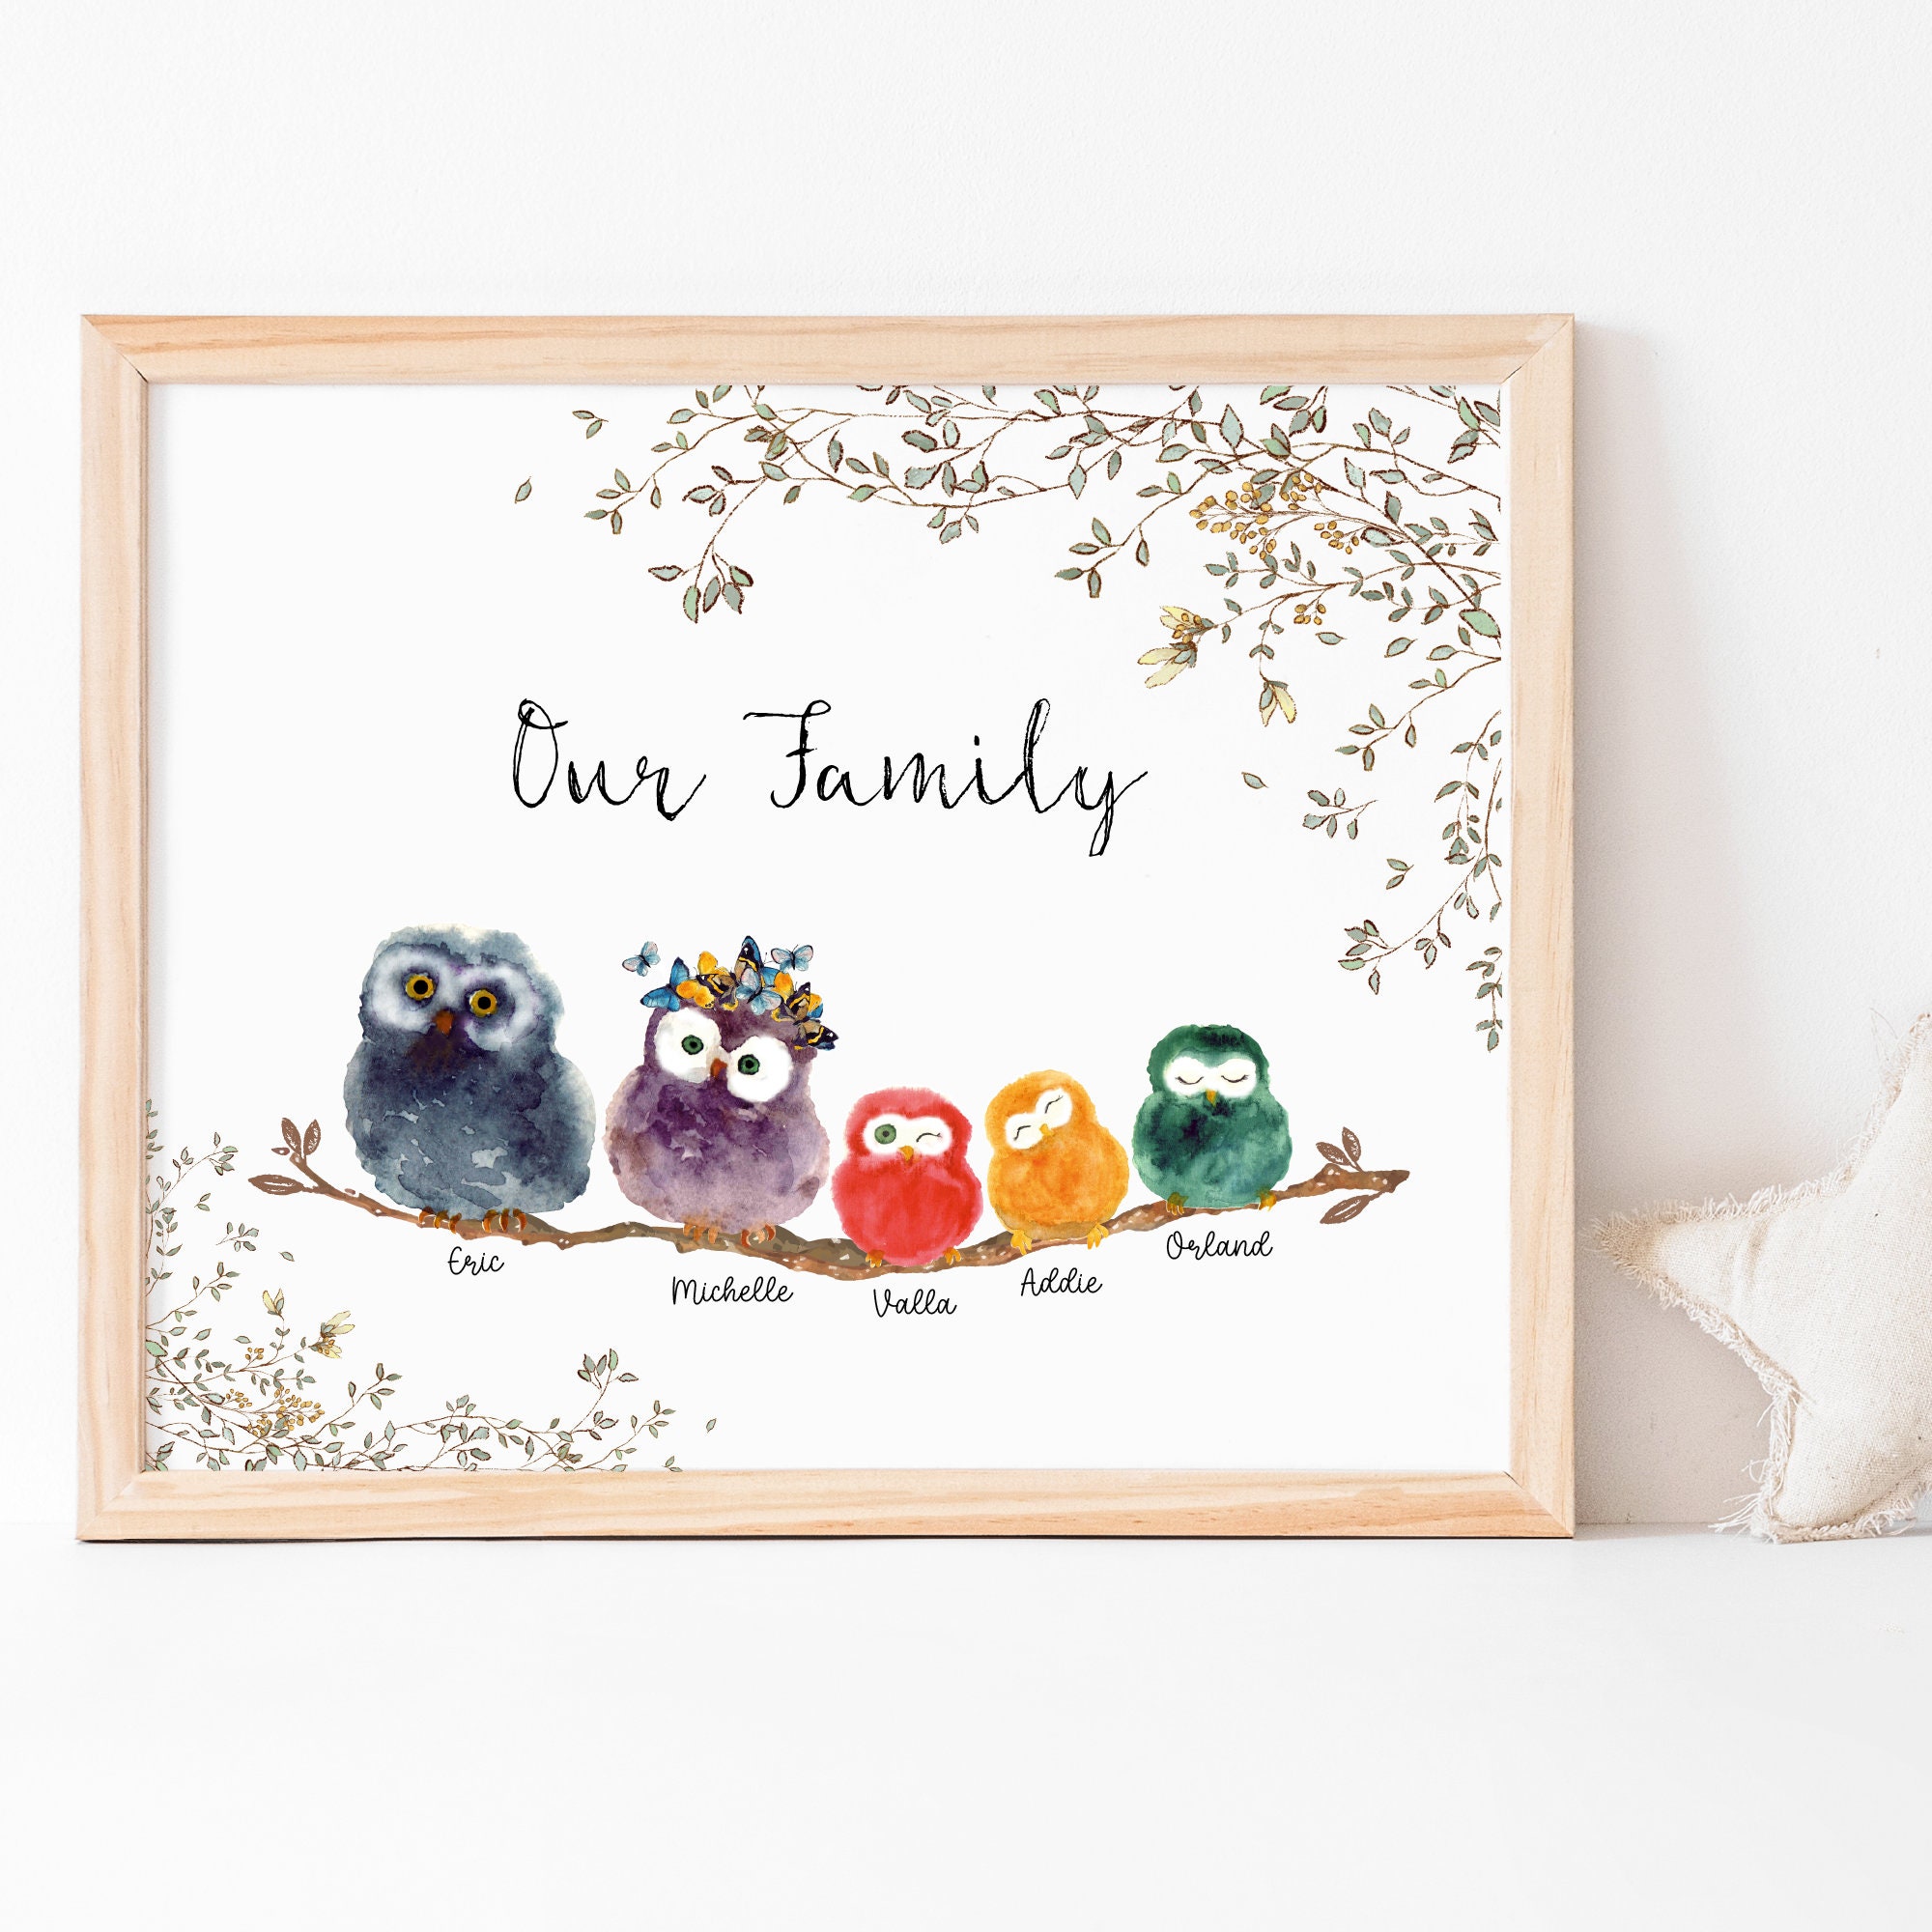 The Owl House Totally Rad Family Photo Satin Posters 300gsm 